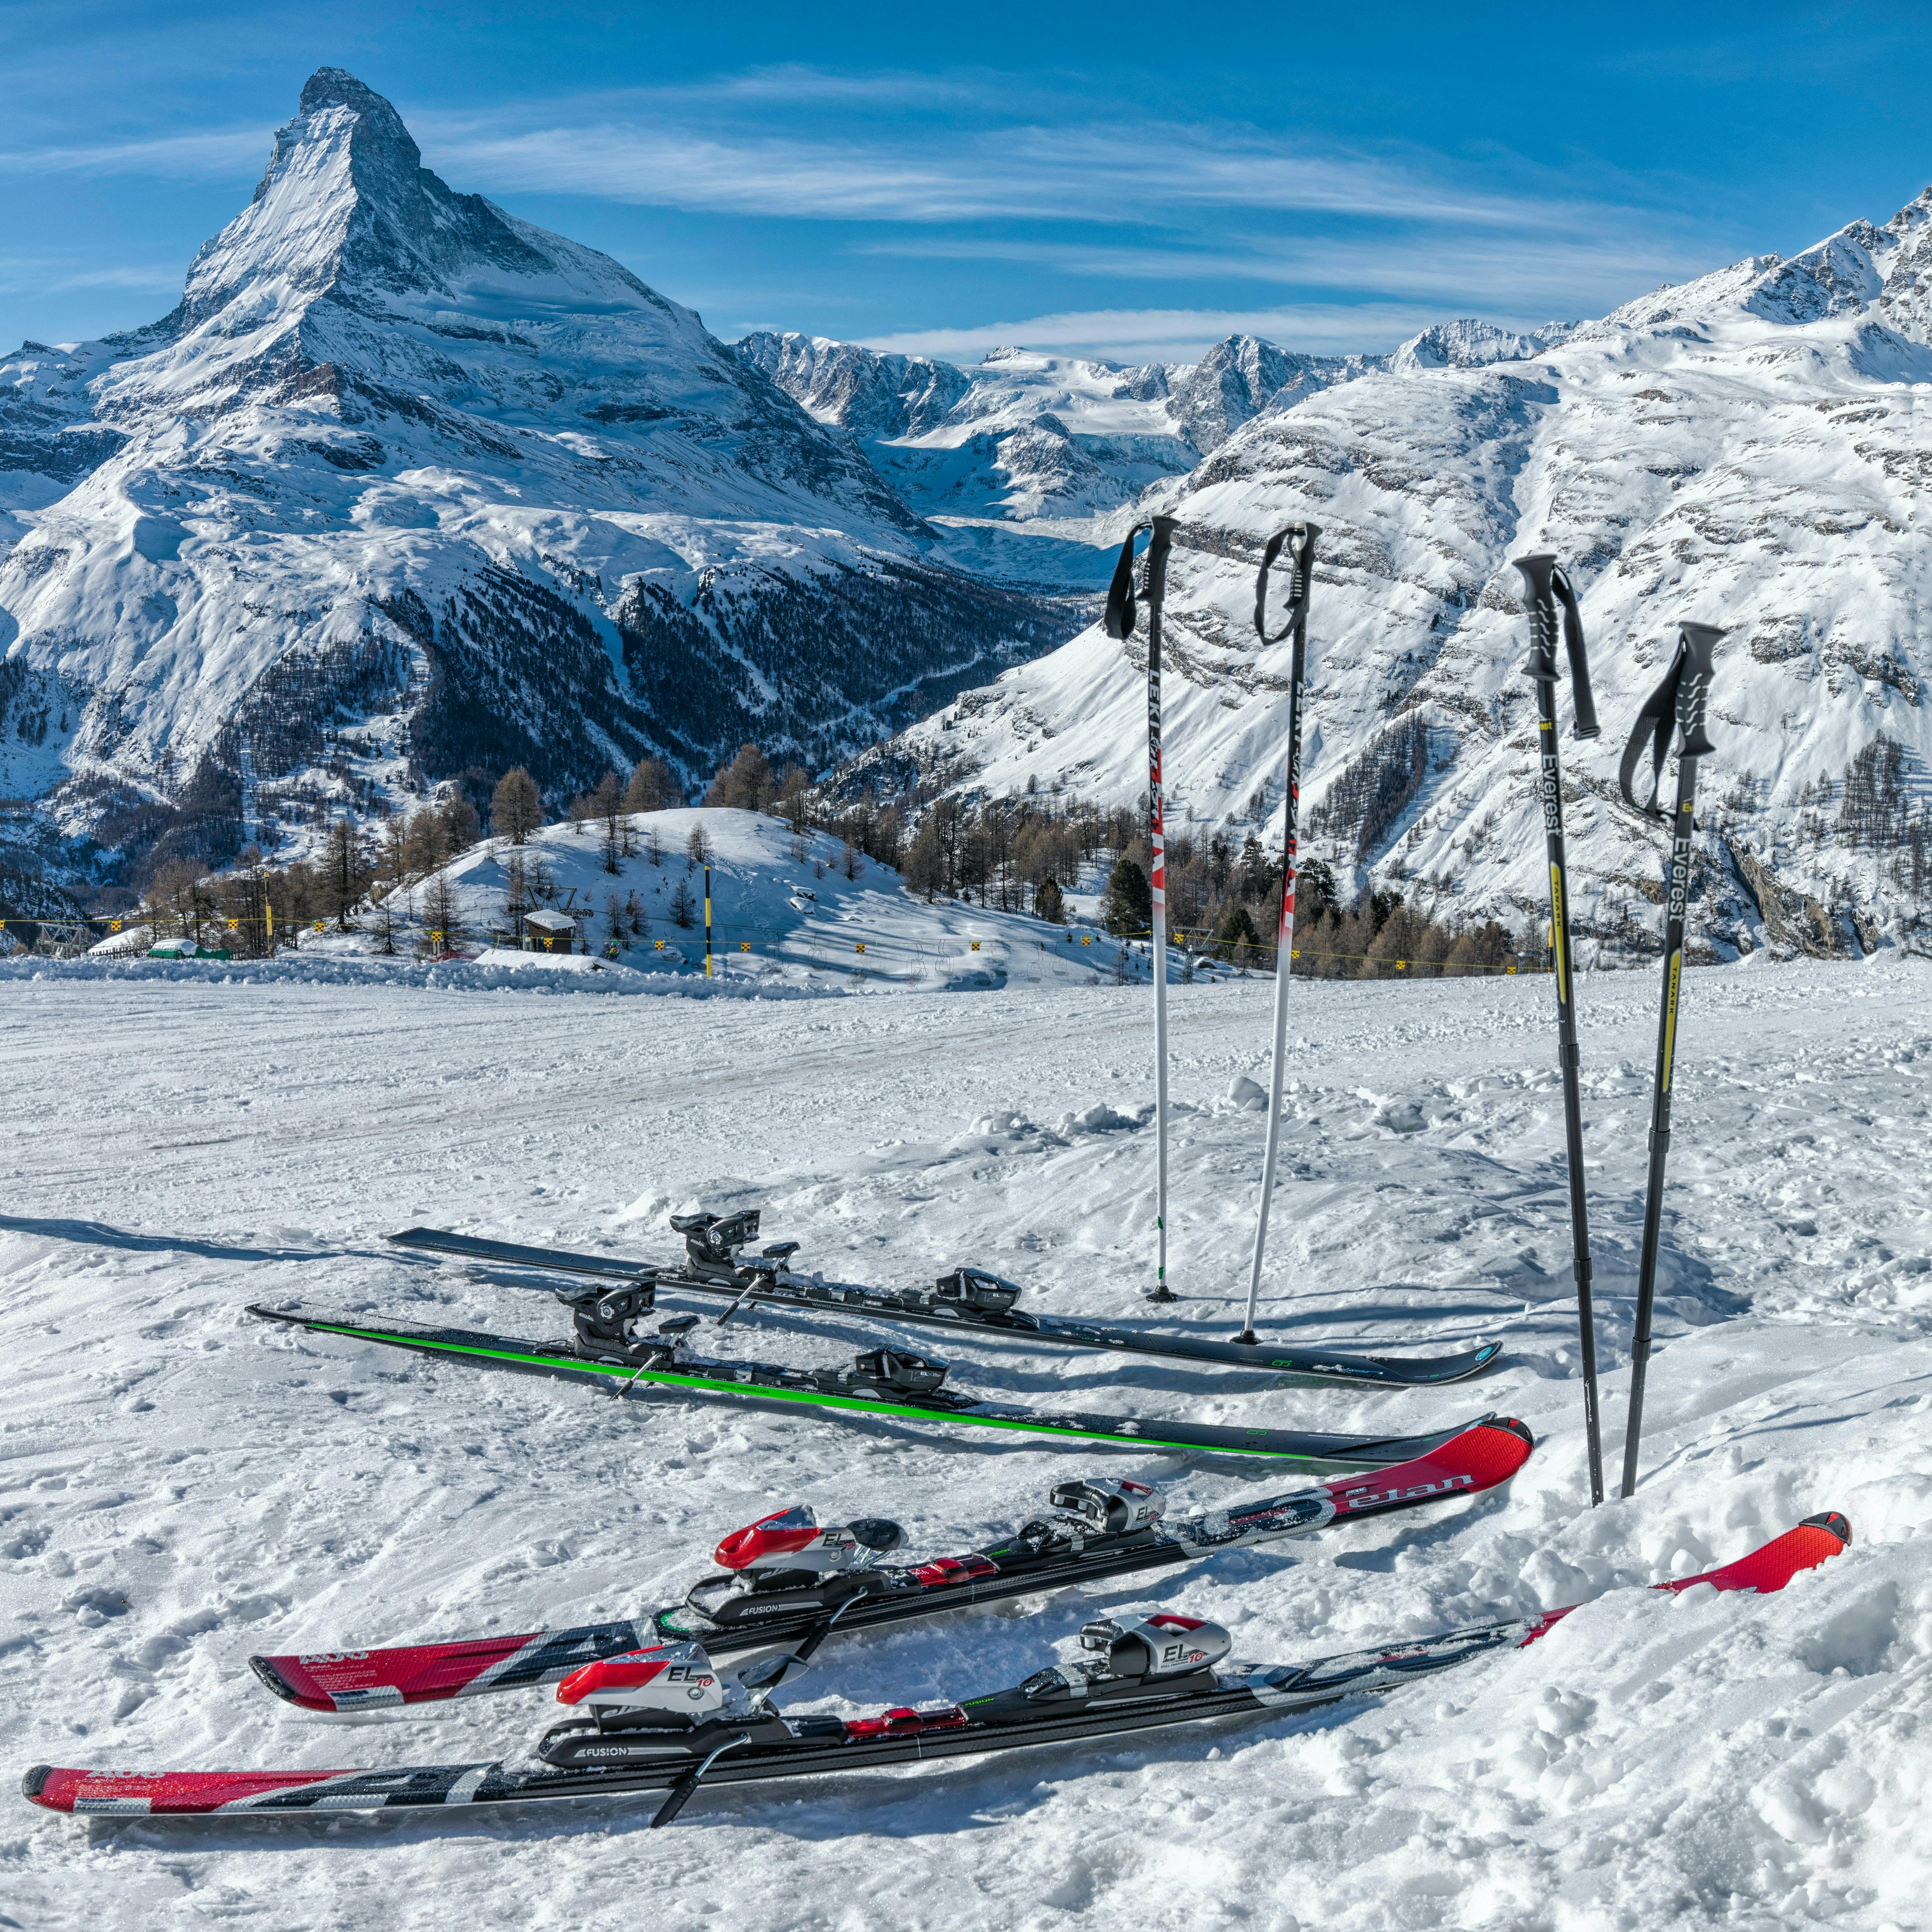 Skis and poles sit on a ski slope with the Matterhorn in the background.